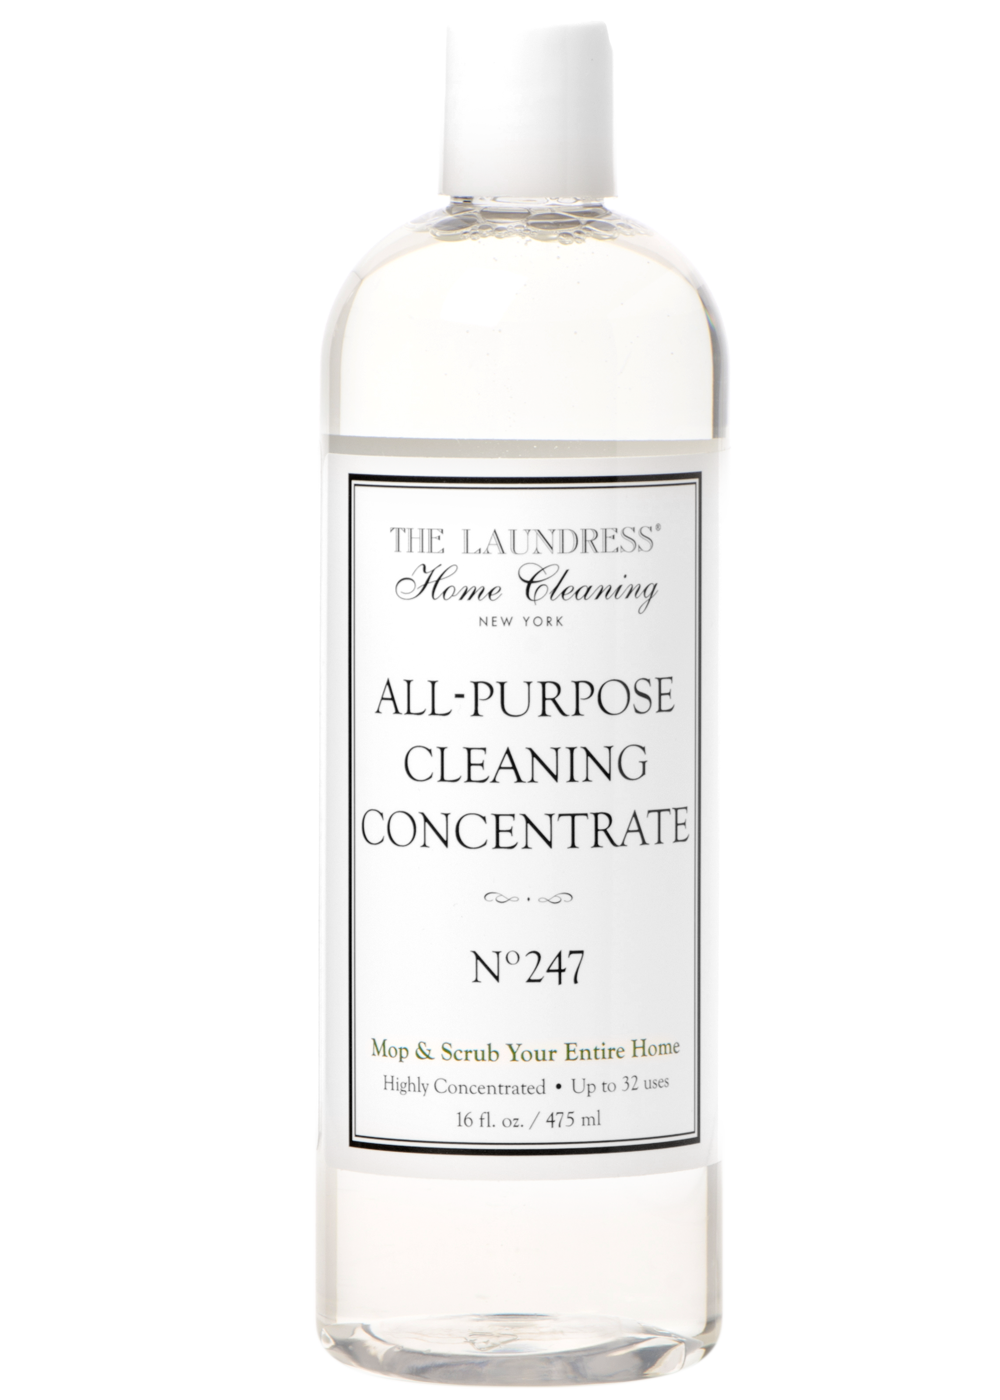 All-Purpose Cleaning Concentrate by the Laundress